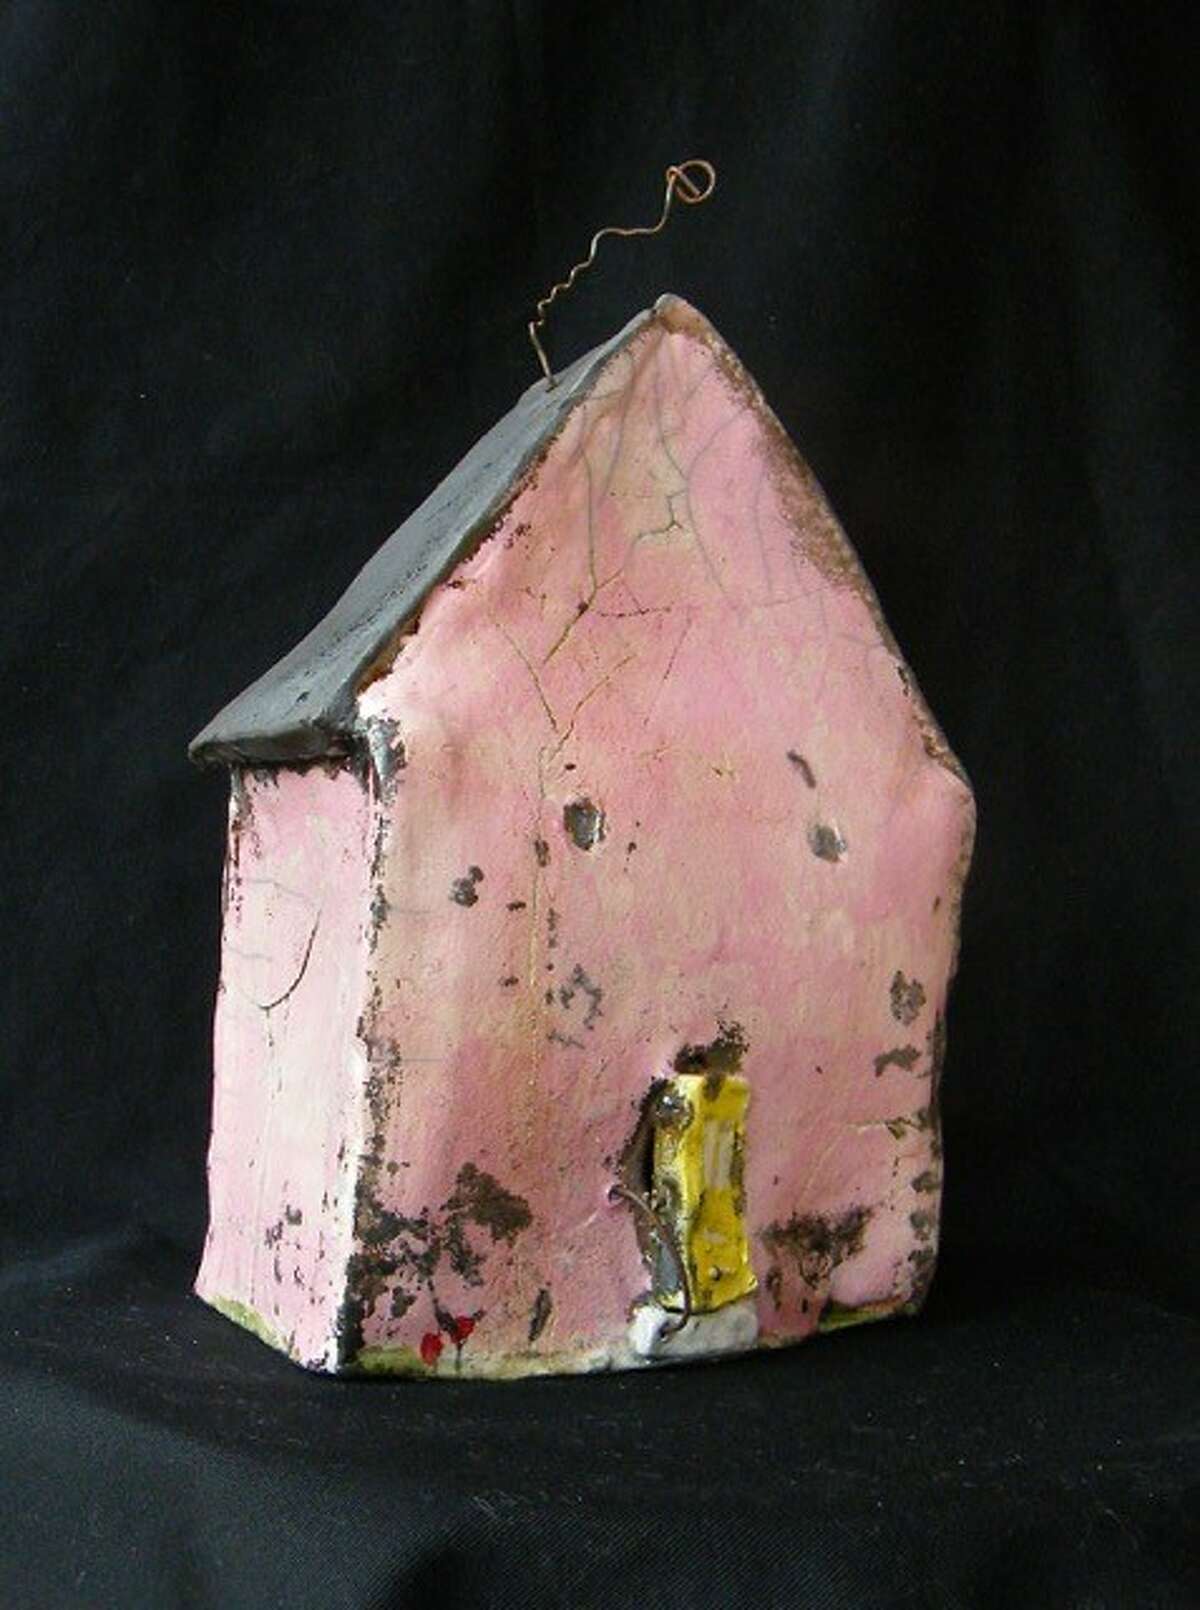 Tricia Tusa's quirky ceramic houses are on view, and for sale, at the Menil Bookstore.